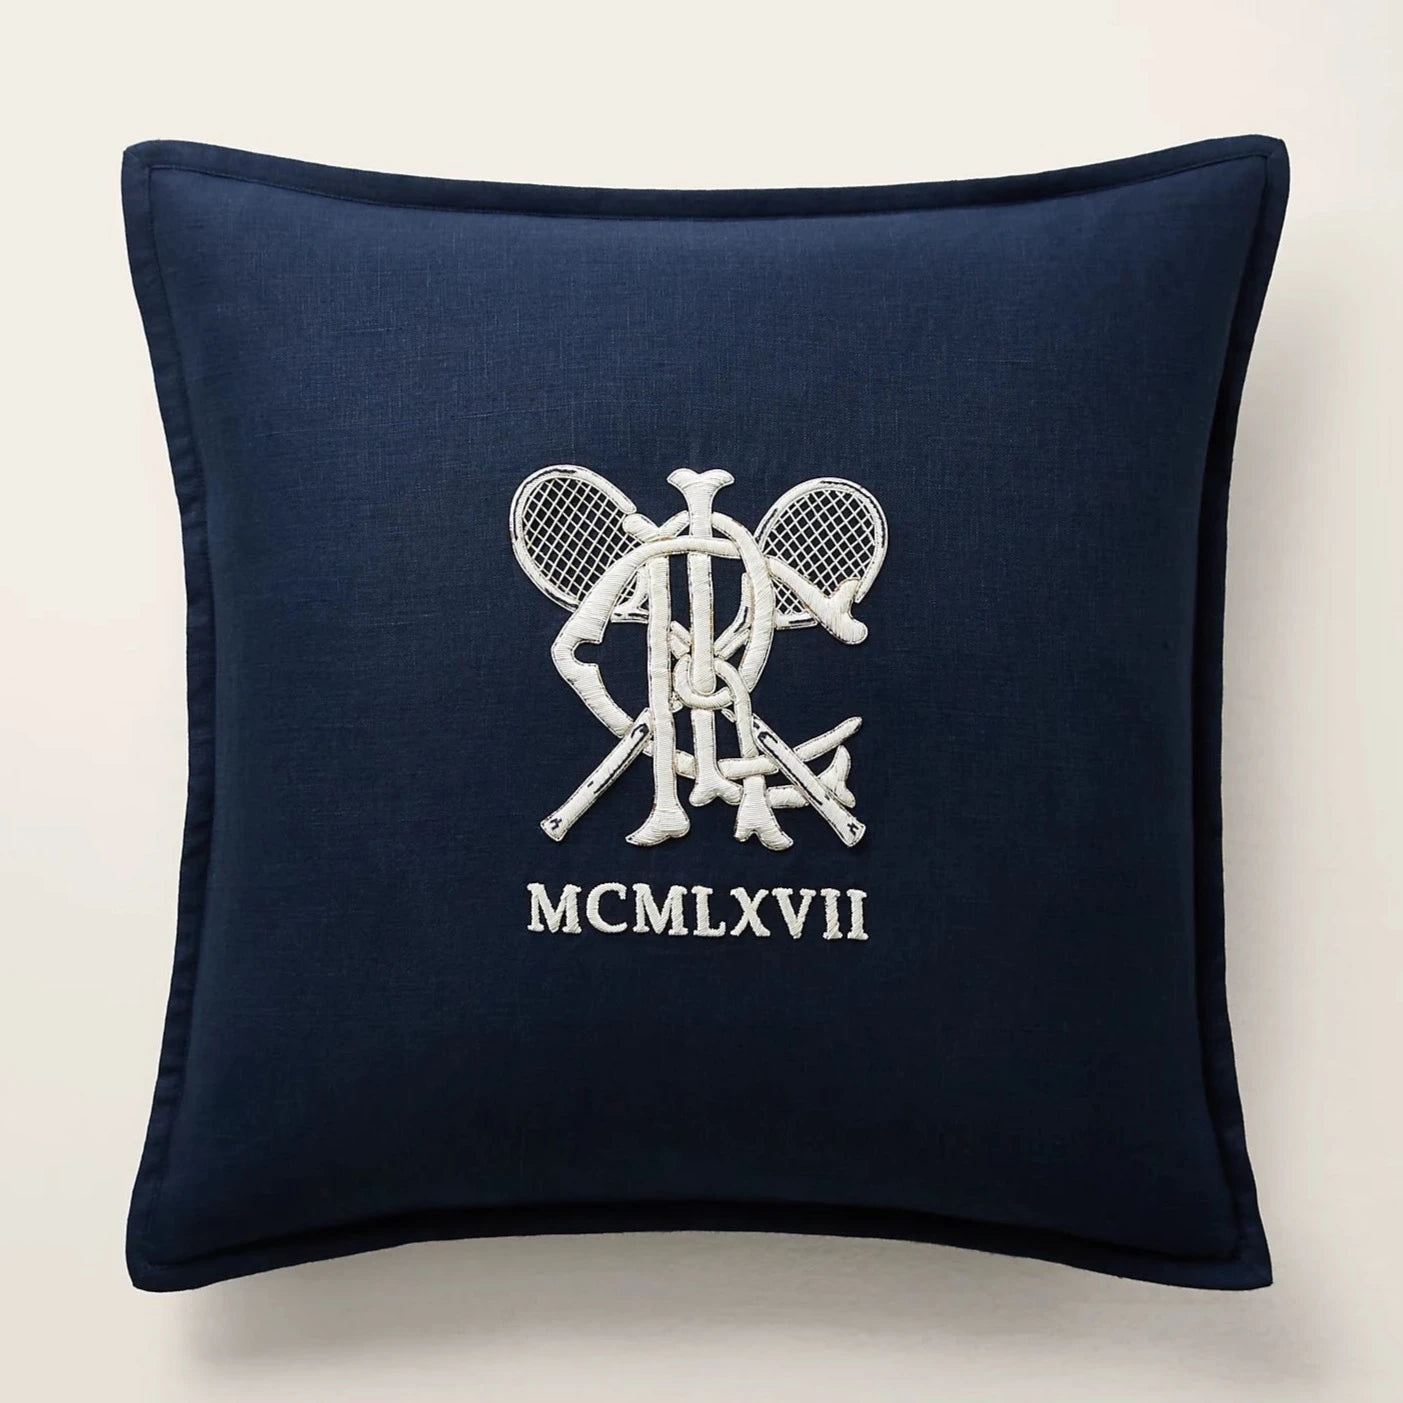 Coussin Meadowmere Navy